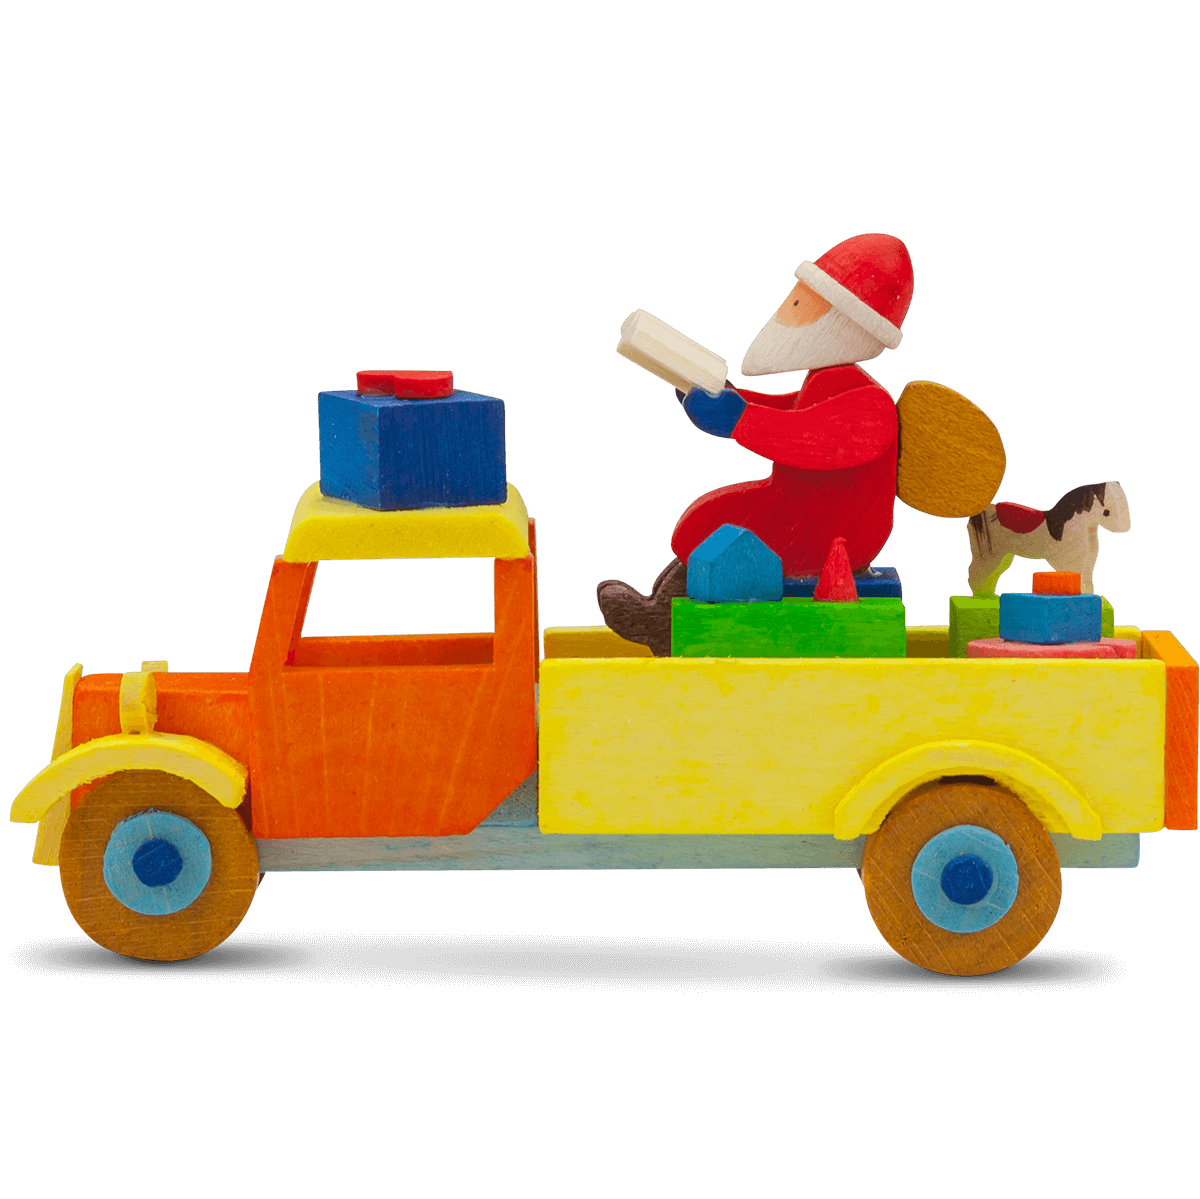 Truck Ornament with santa claus